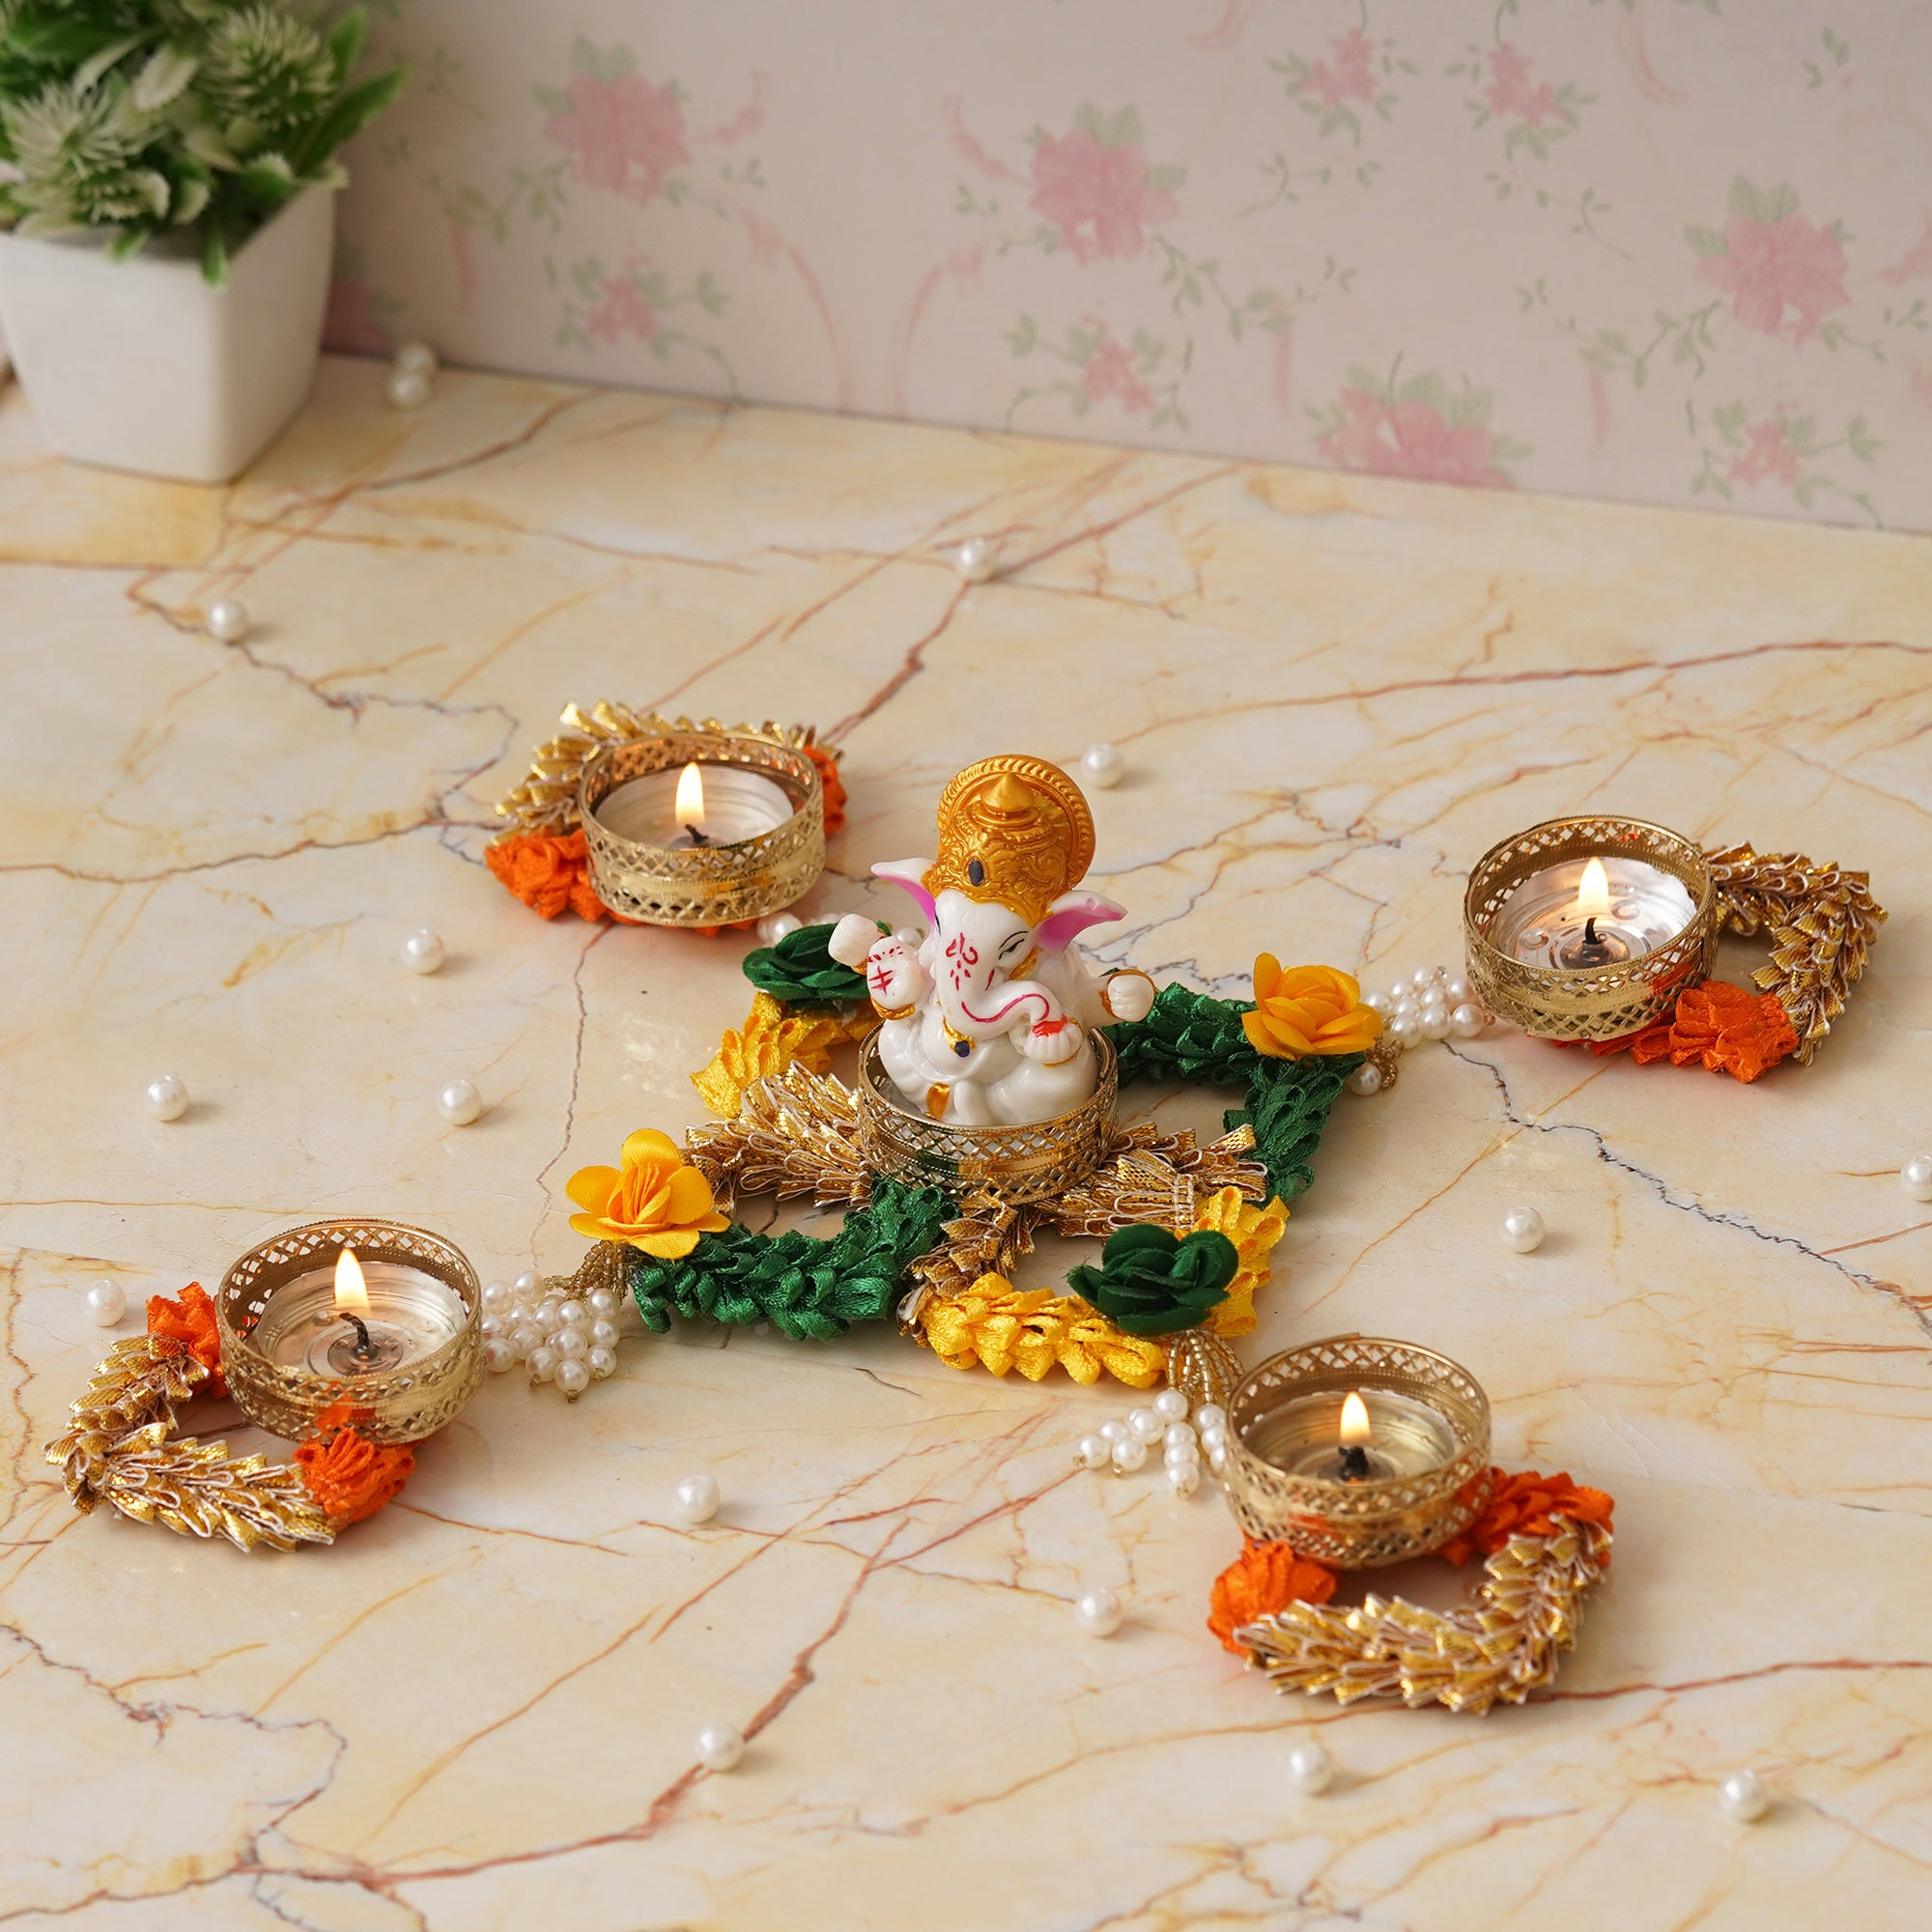 eCraftIndia Lord Ganesha Idol on Floral and Beads Embellished Handcrafted Plate with 4 Decorative Tea Light Candle Holders 5